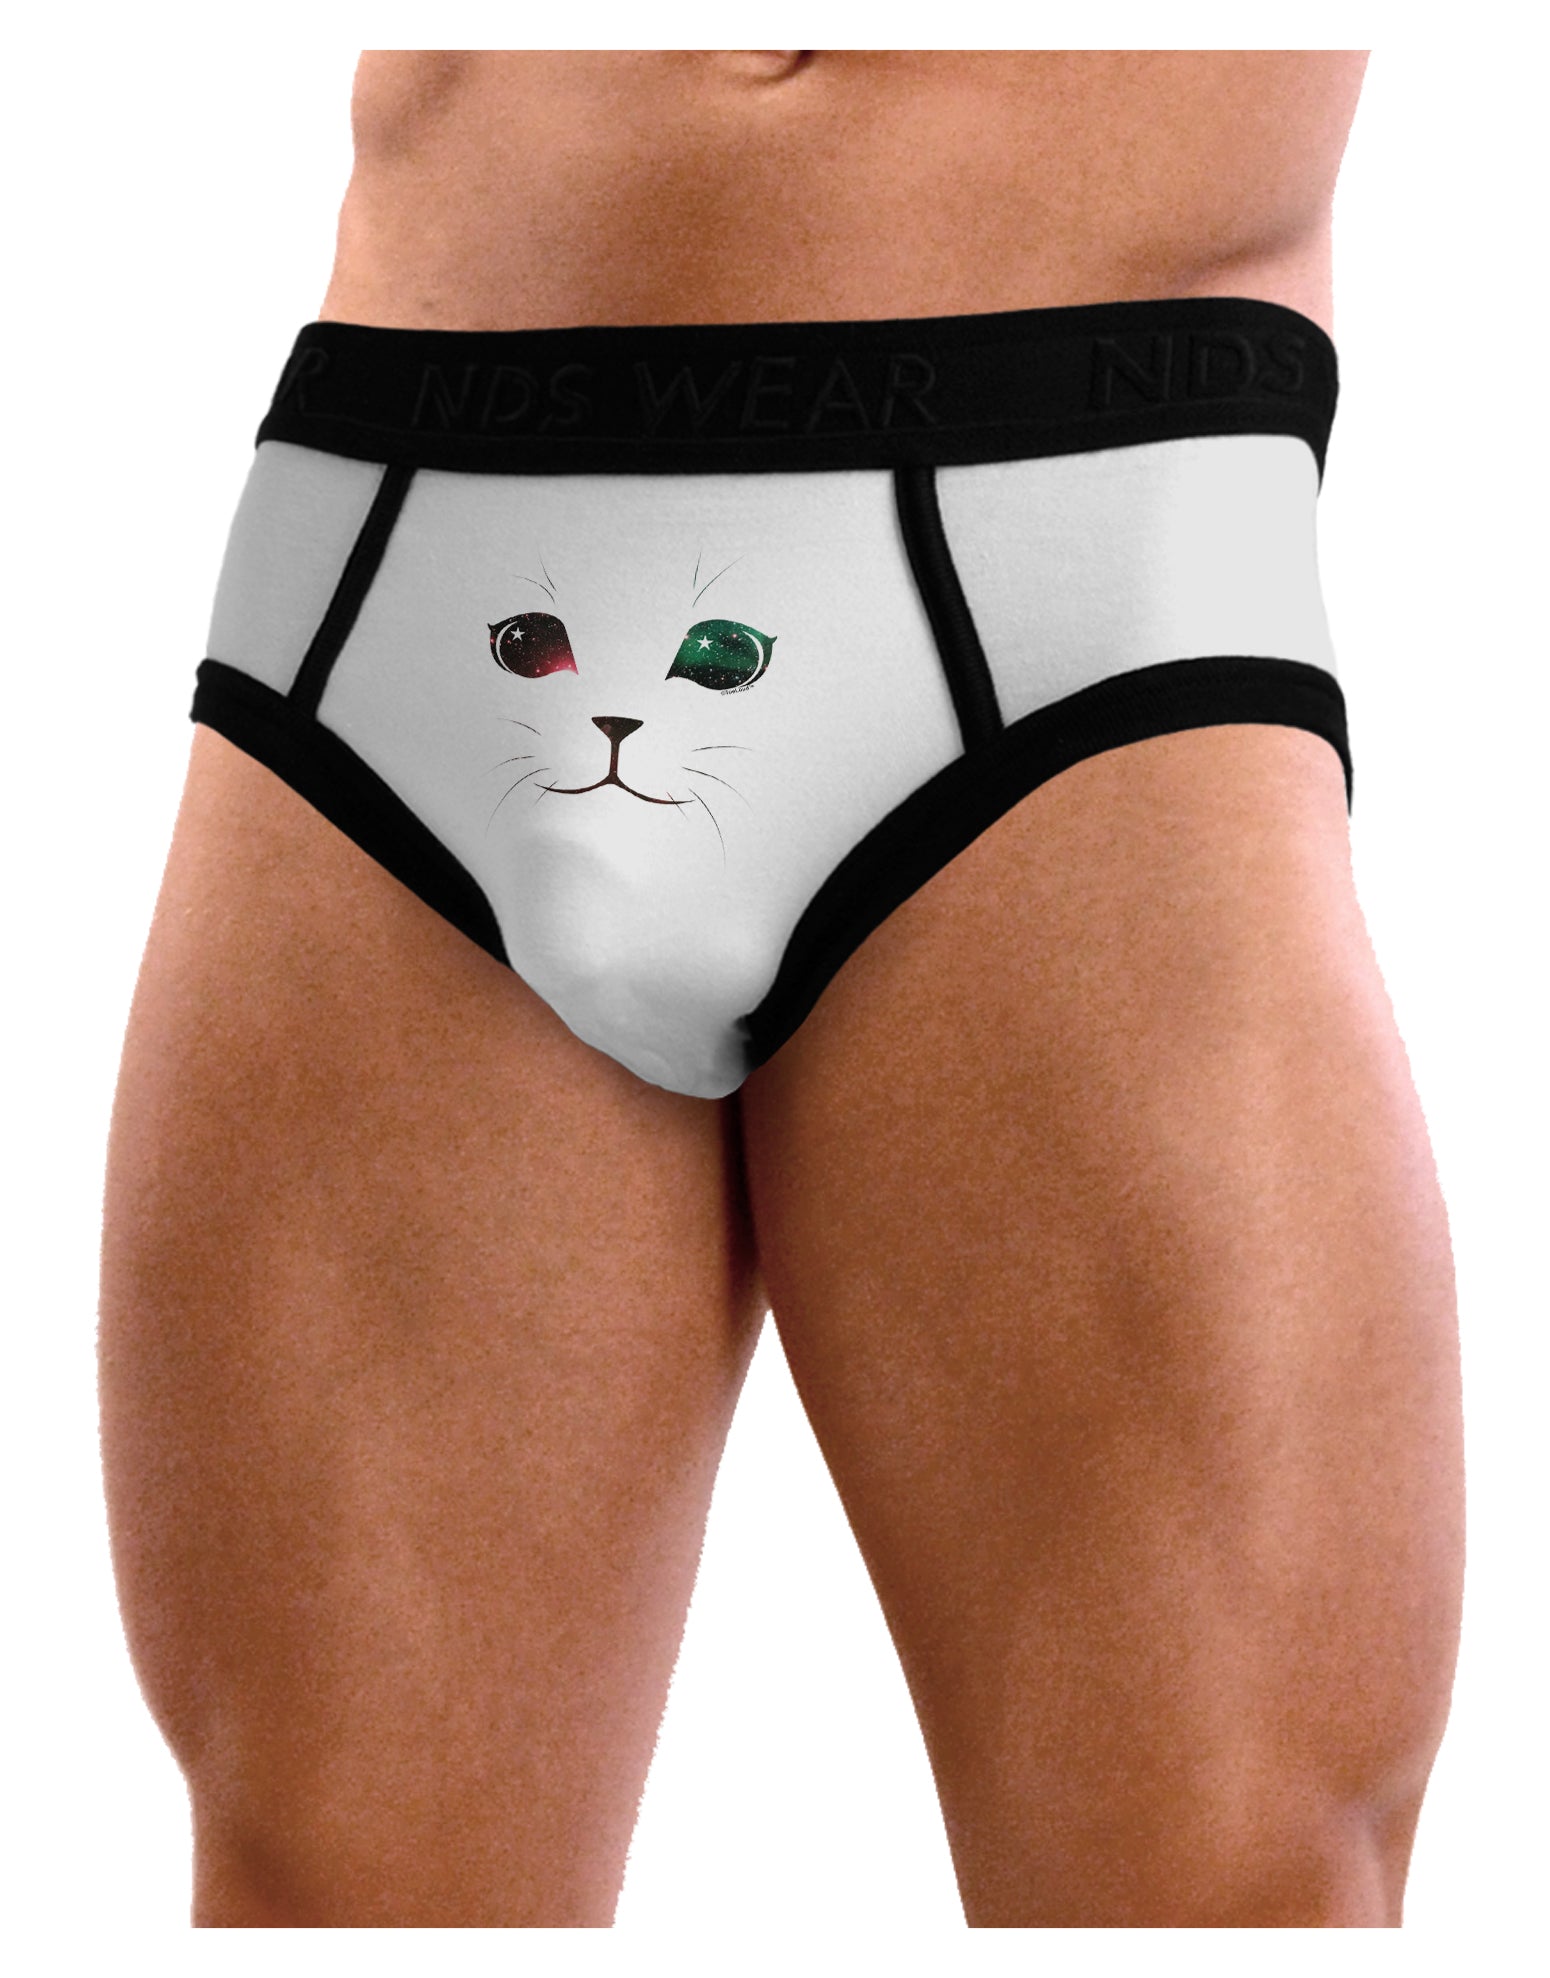 Adorable innerwear/ cat clothes for cats